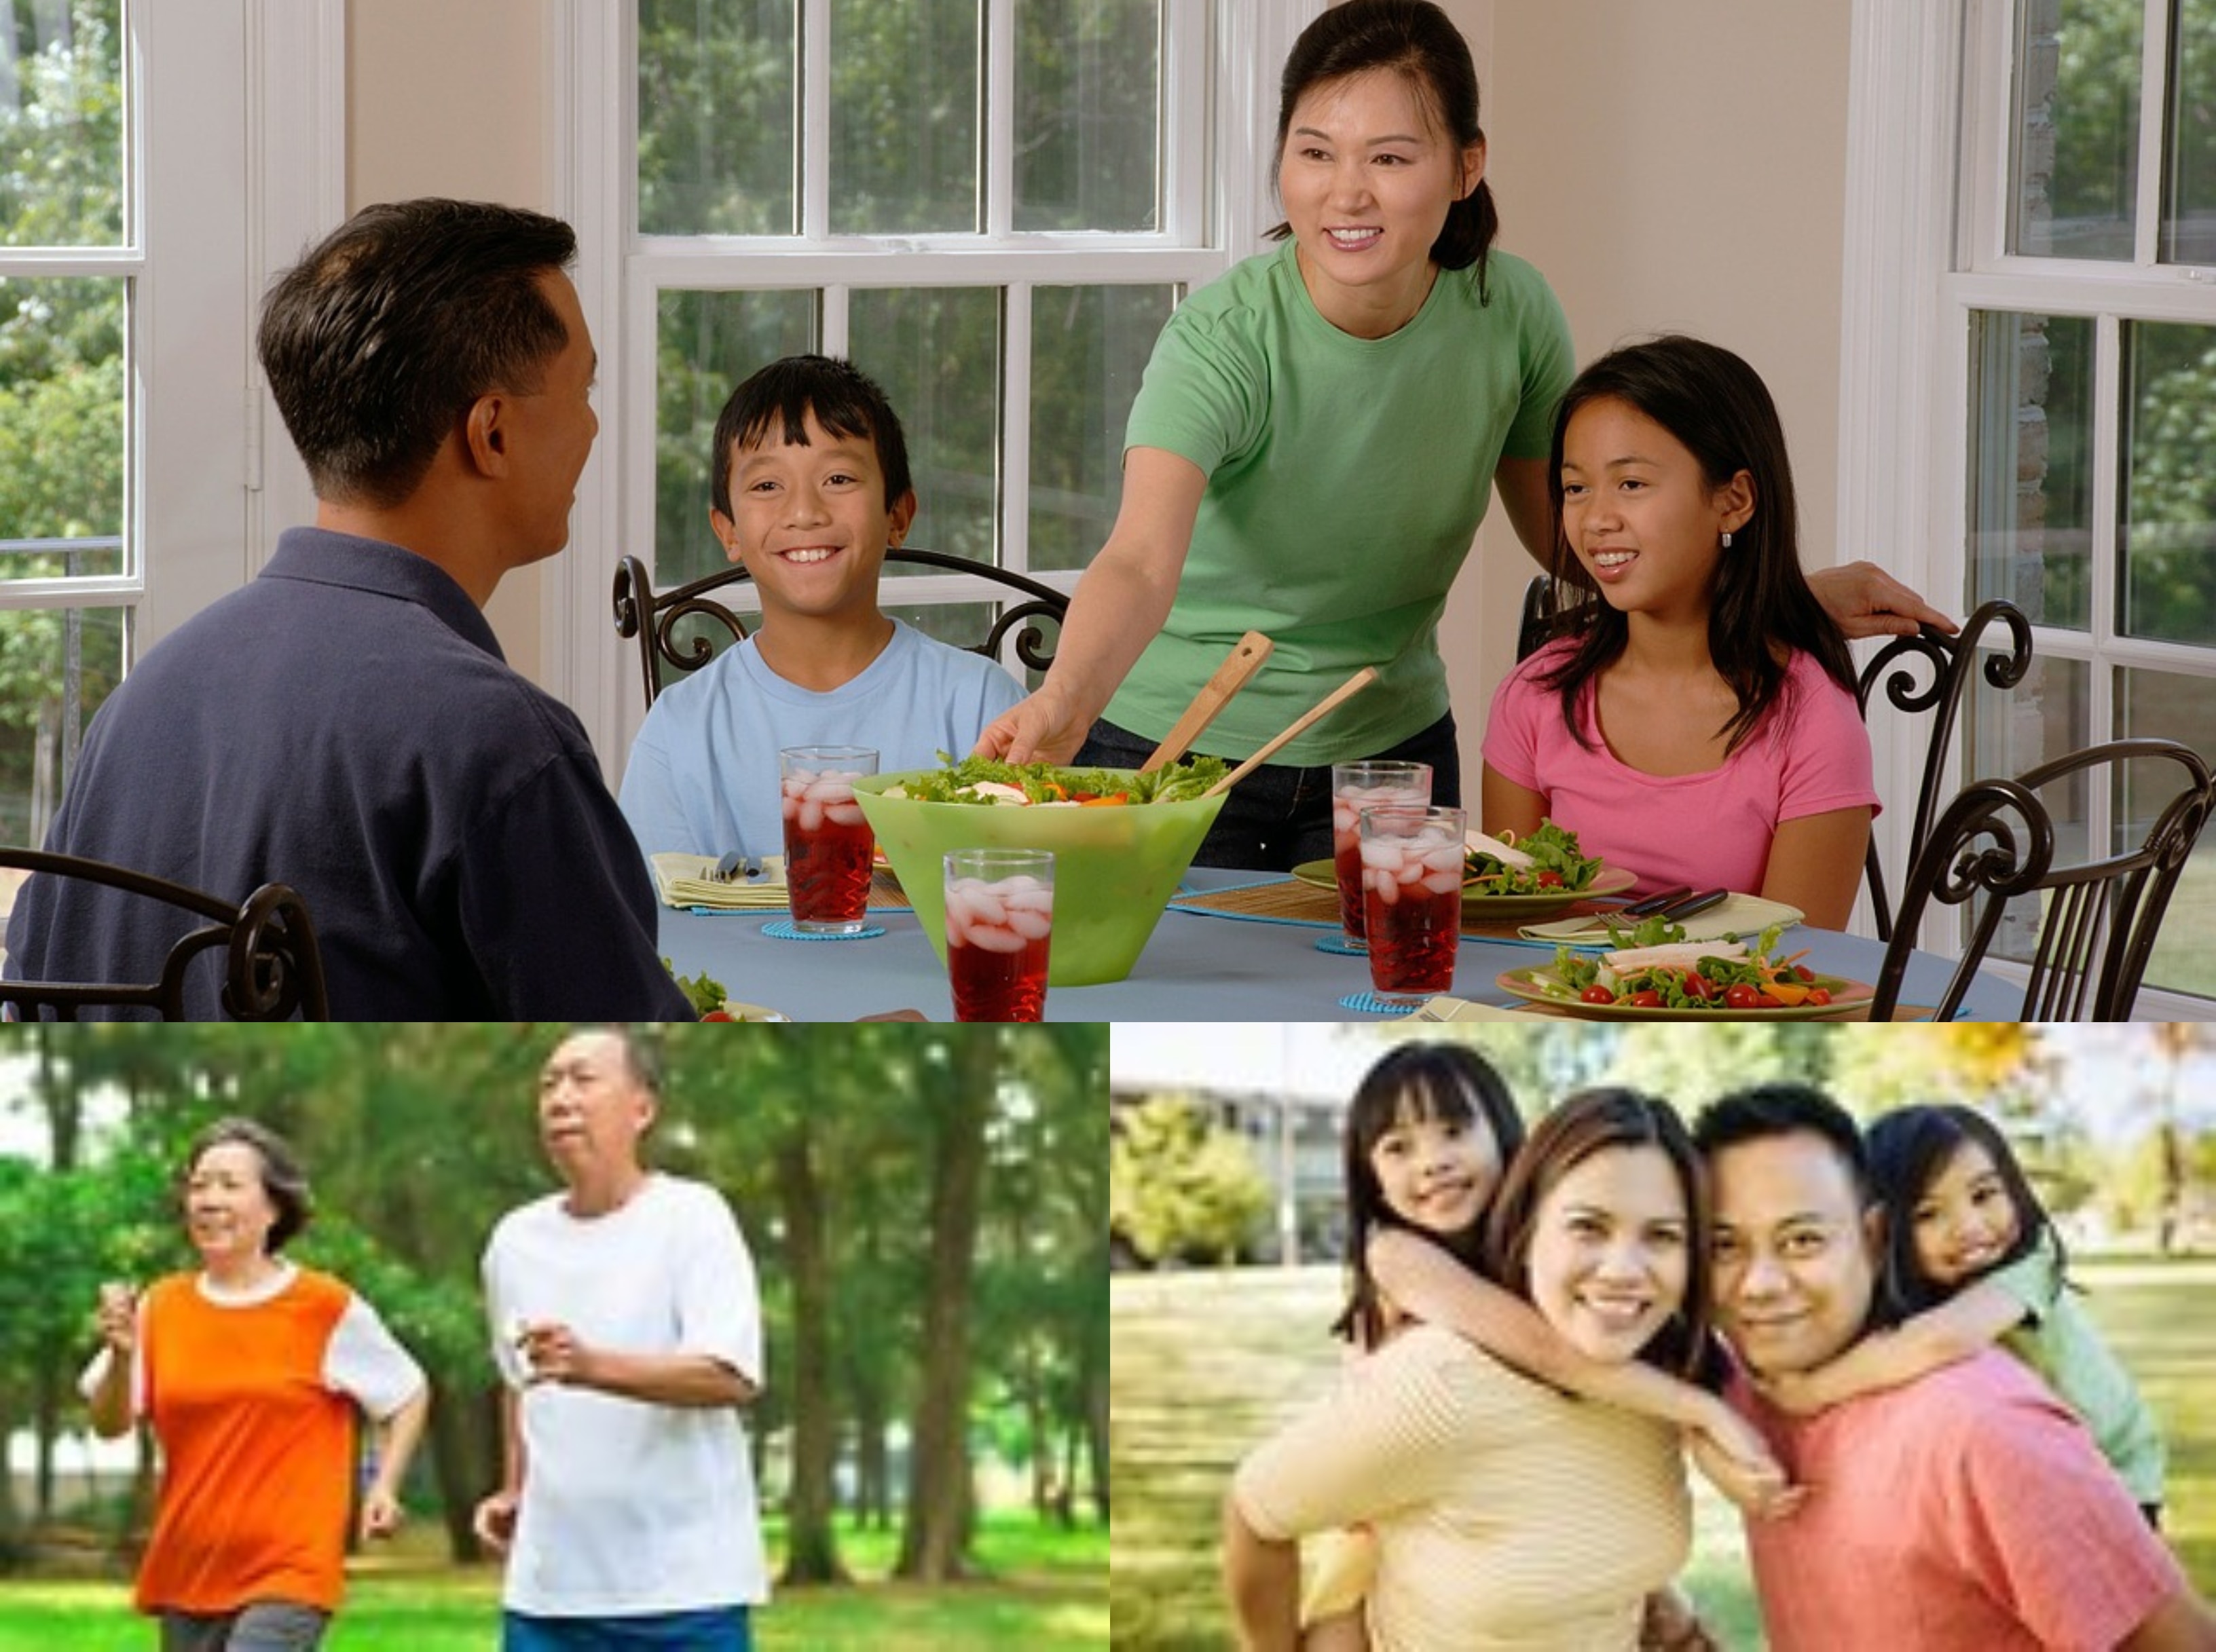 Get help from friends and family, join support groups and have a healthy lifestyle.